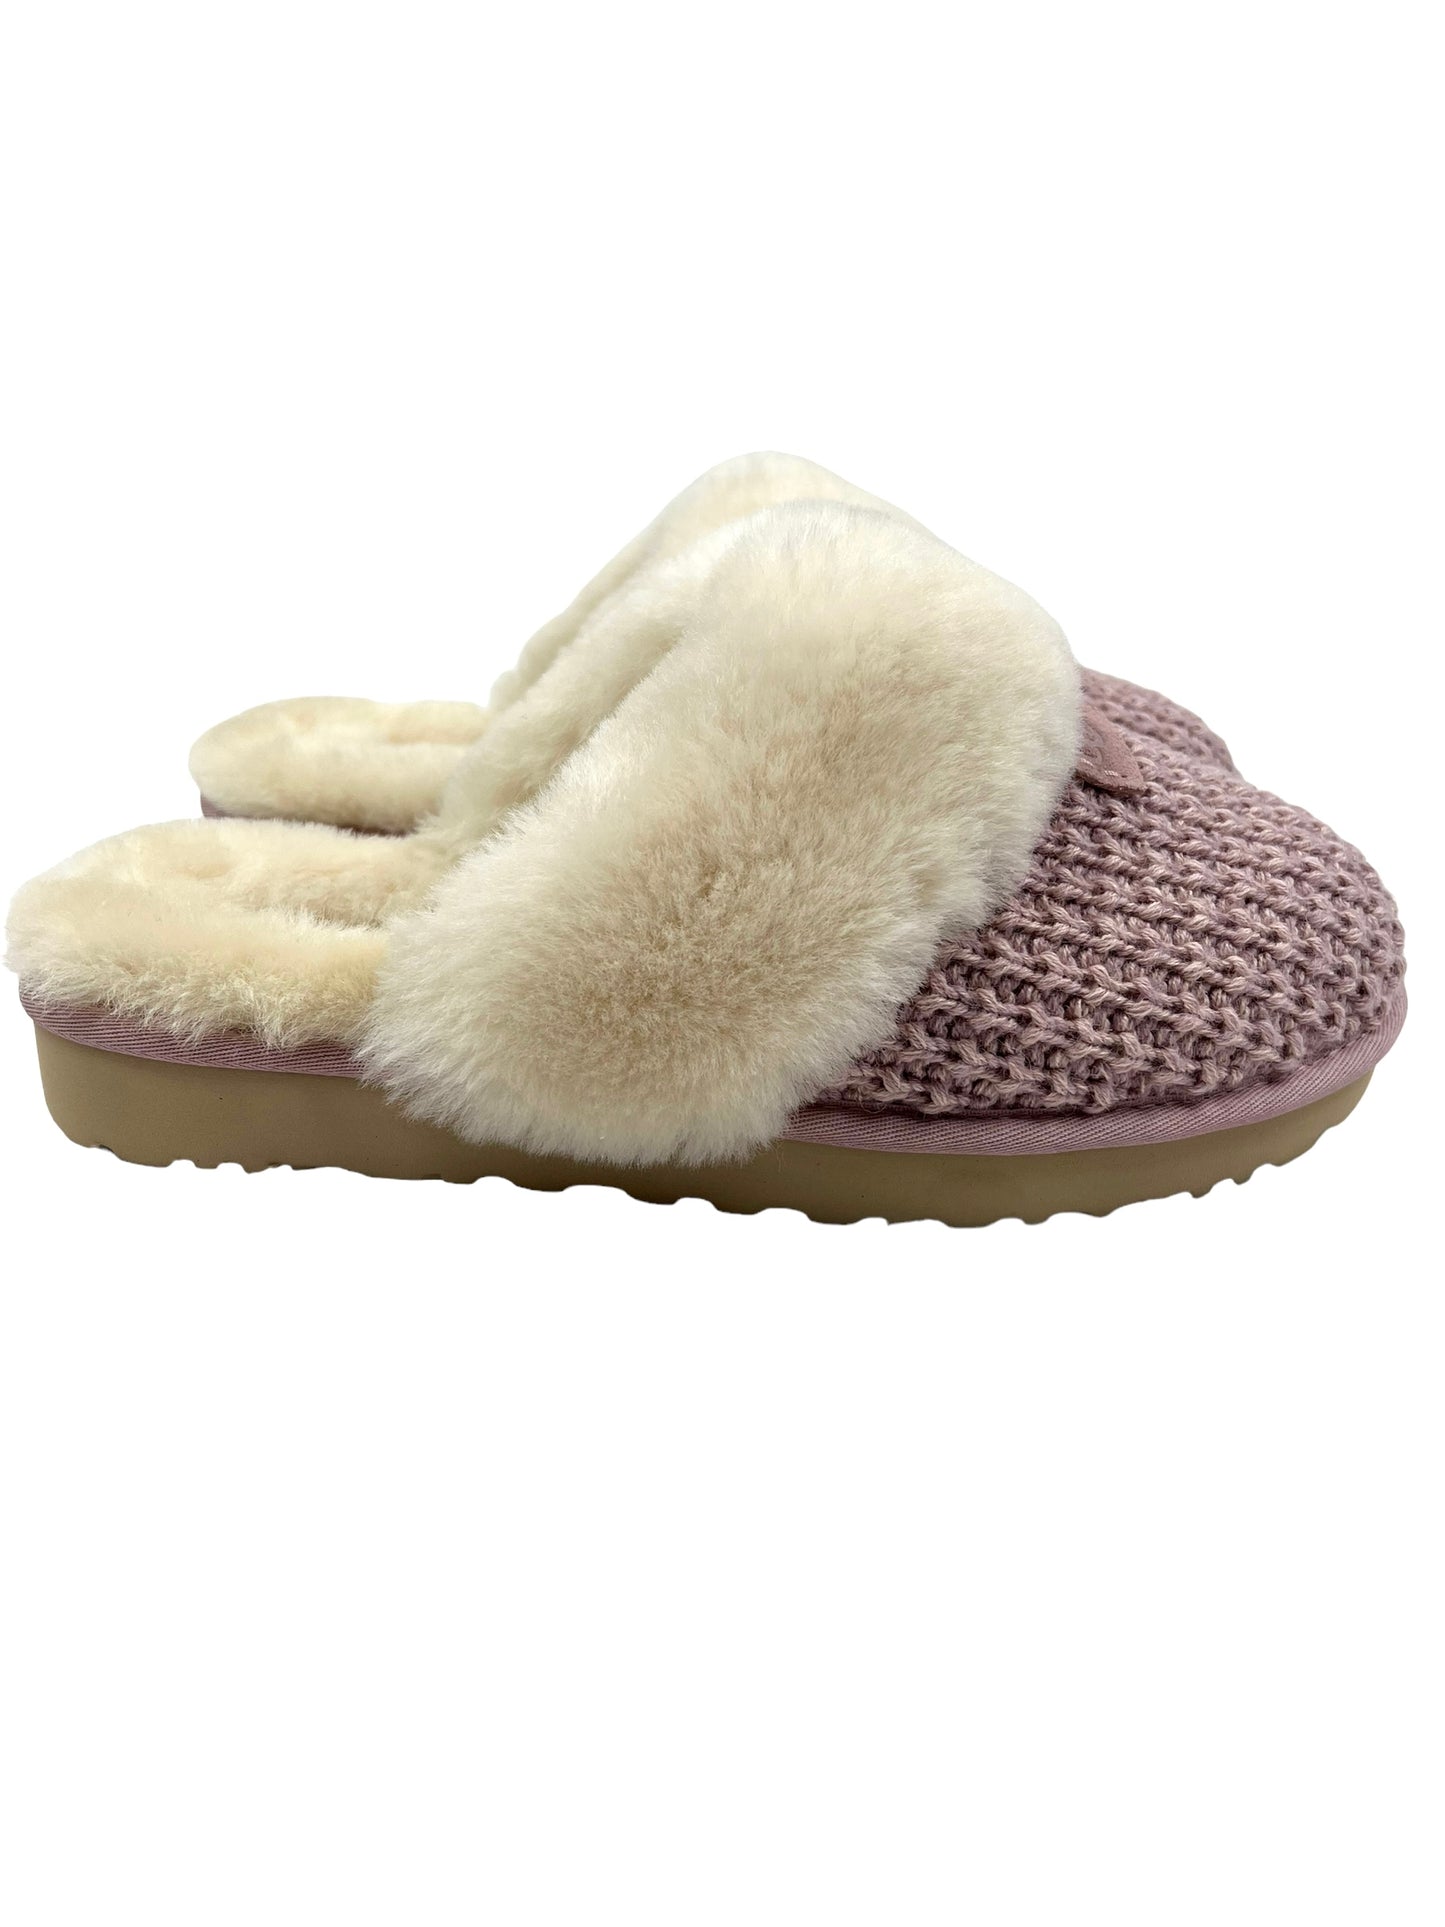 Ugg Size 11 Pink Cozy Knit Slippers